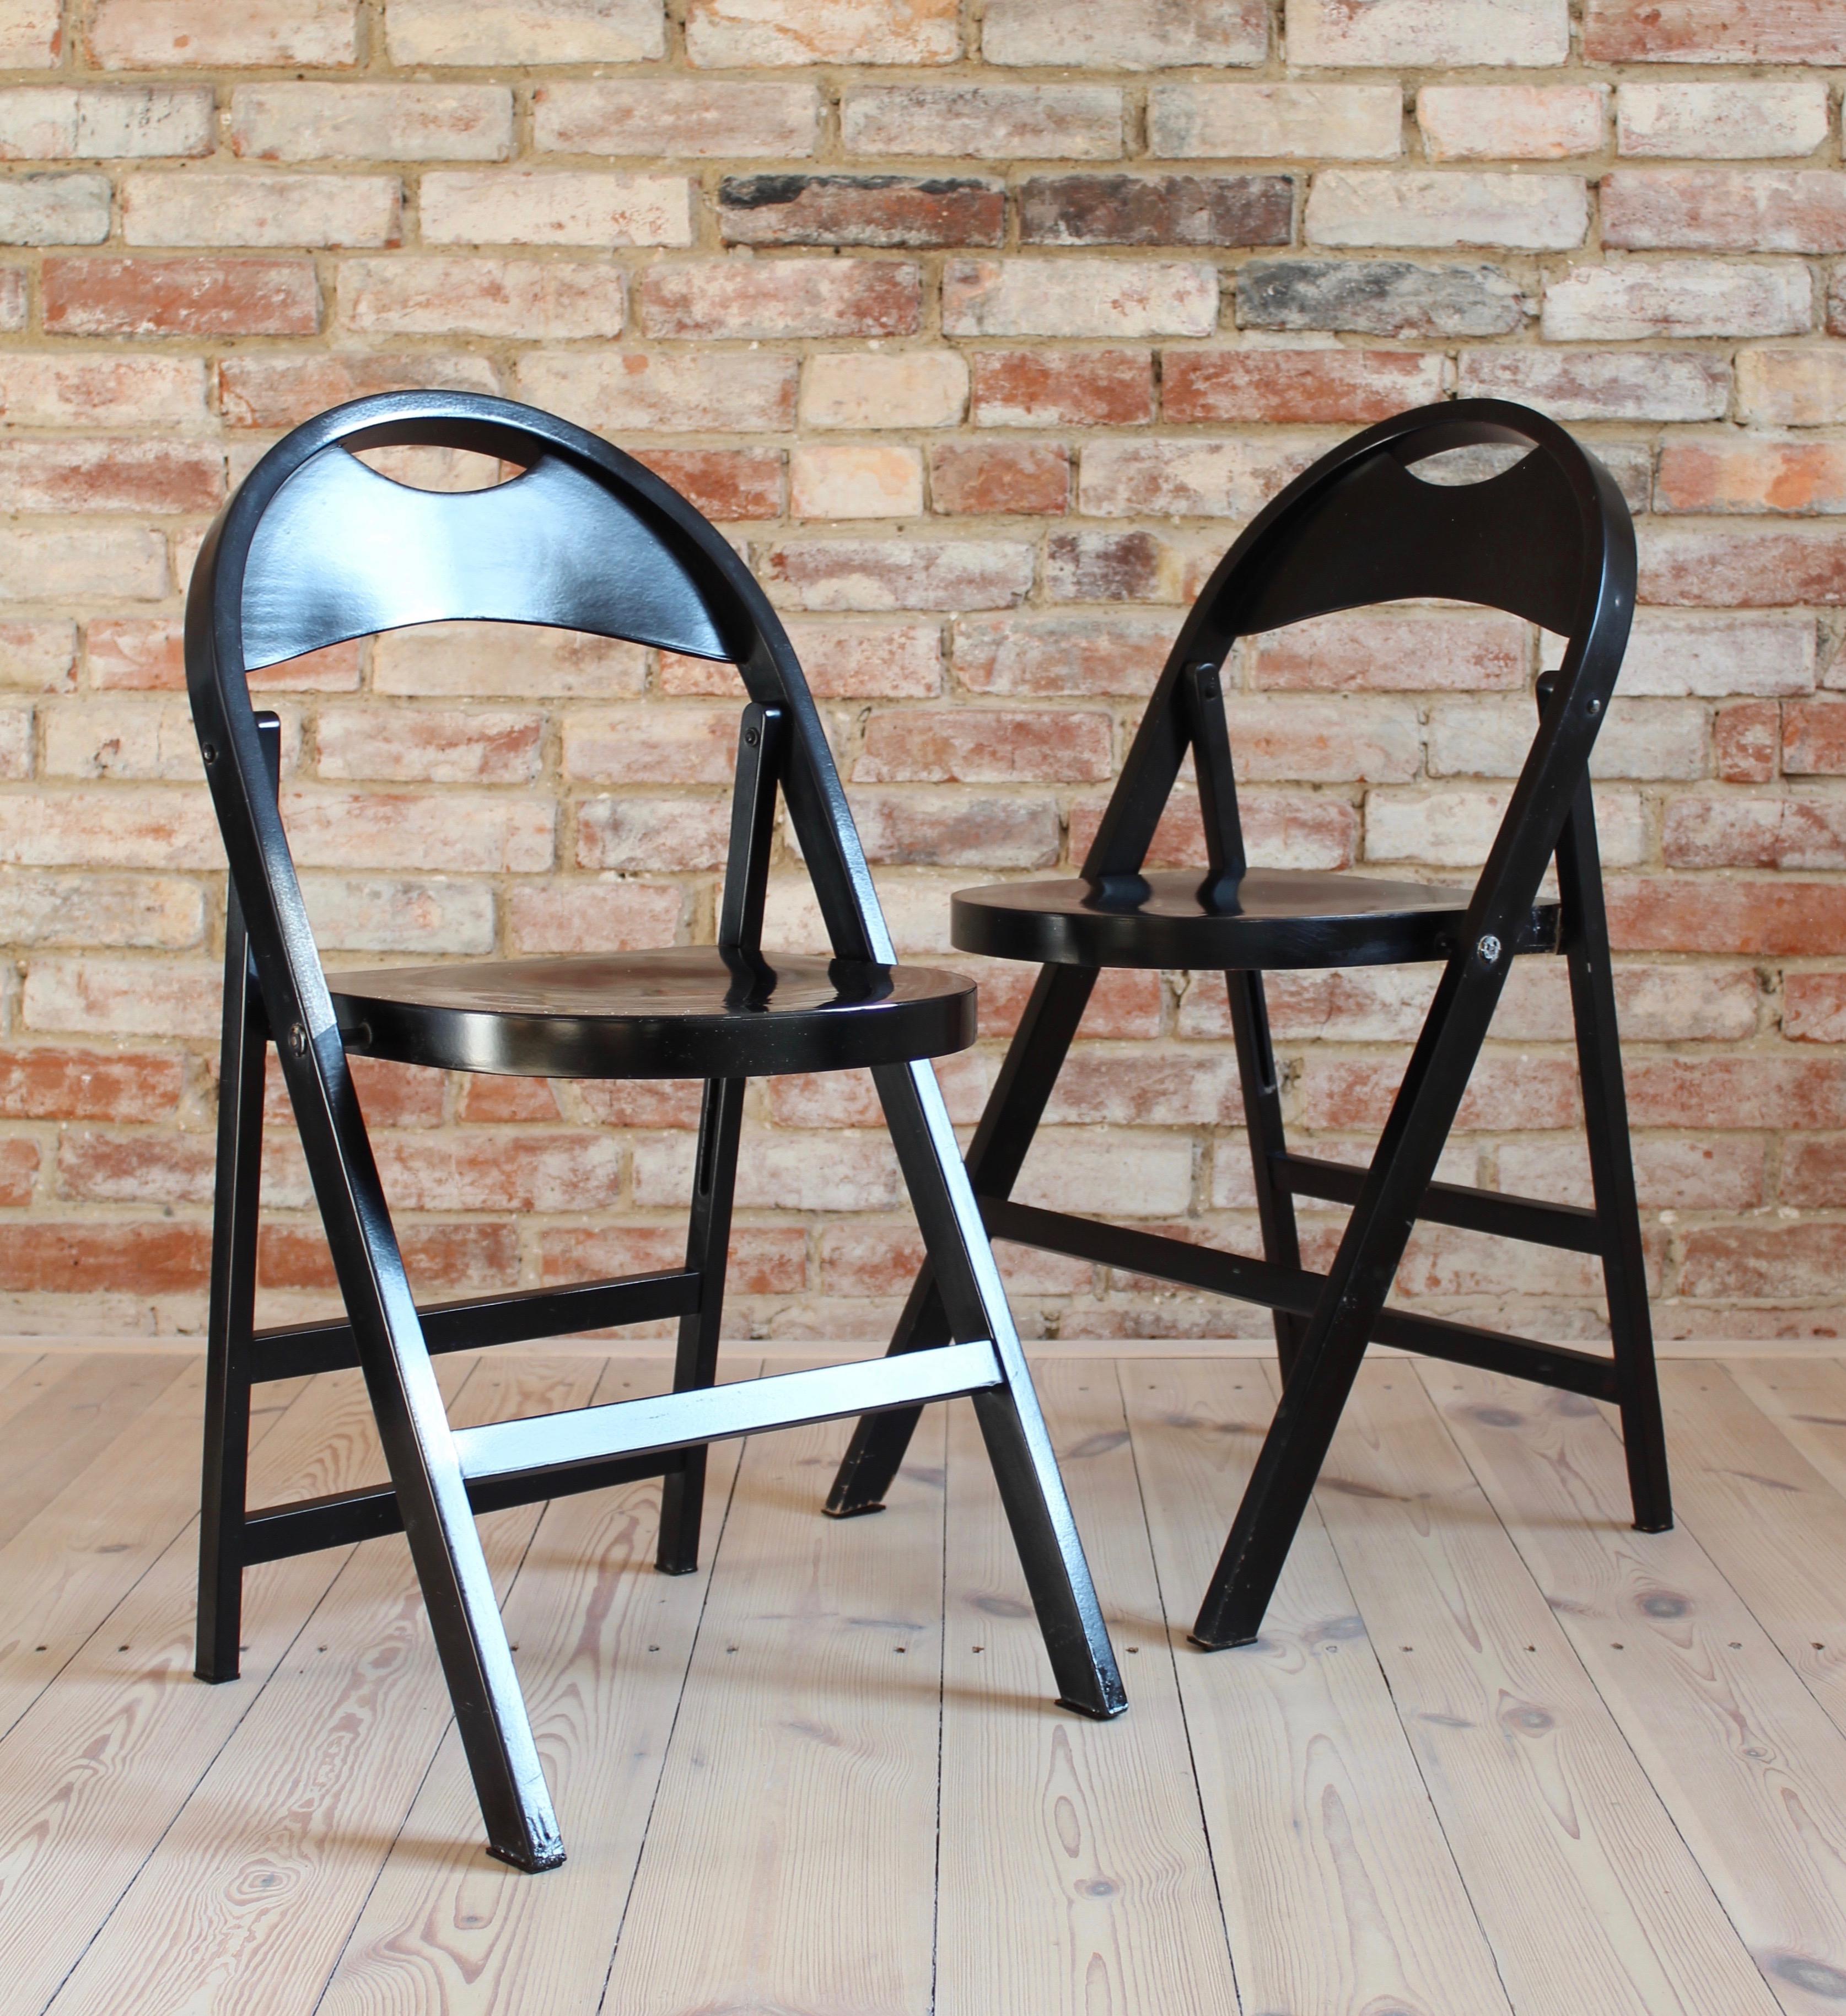 This set of four folding chairs is a famous model B 751 by Thonet. The design is very classical and the folding is a very practical feature. The chairs have a deep black color with a subtle shine. There are little distressed spots shown in the